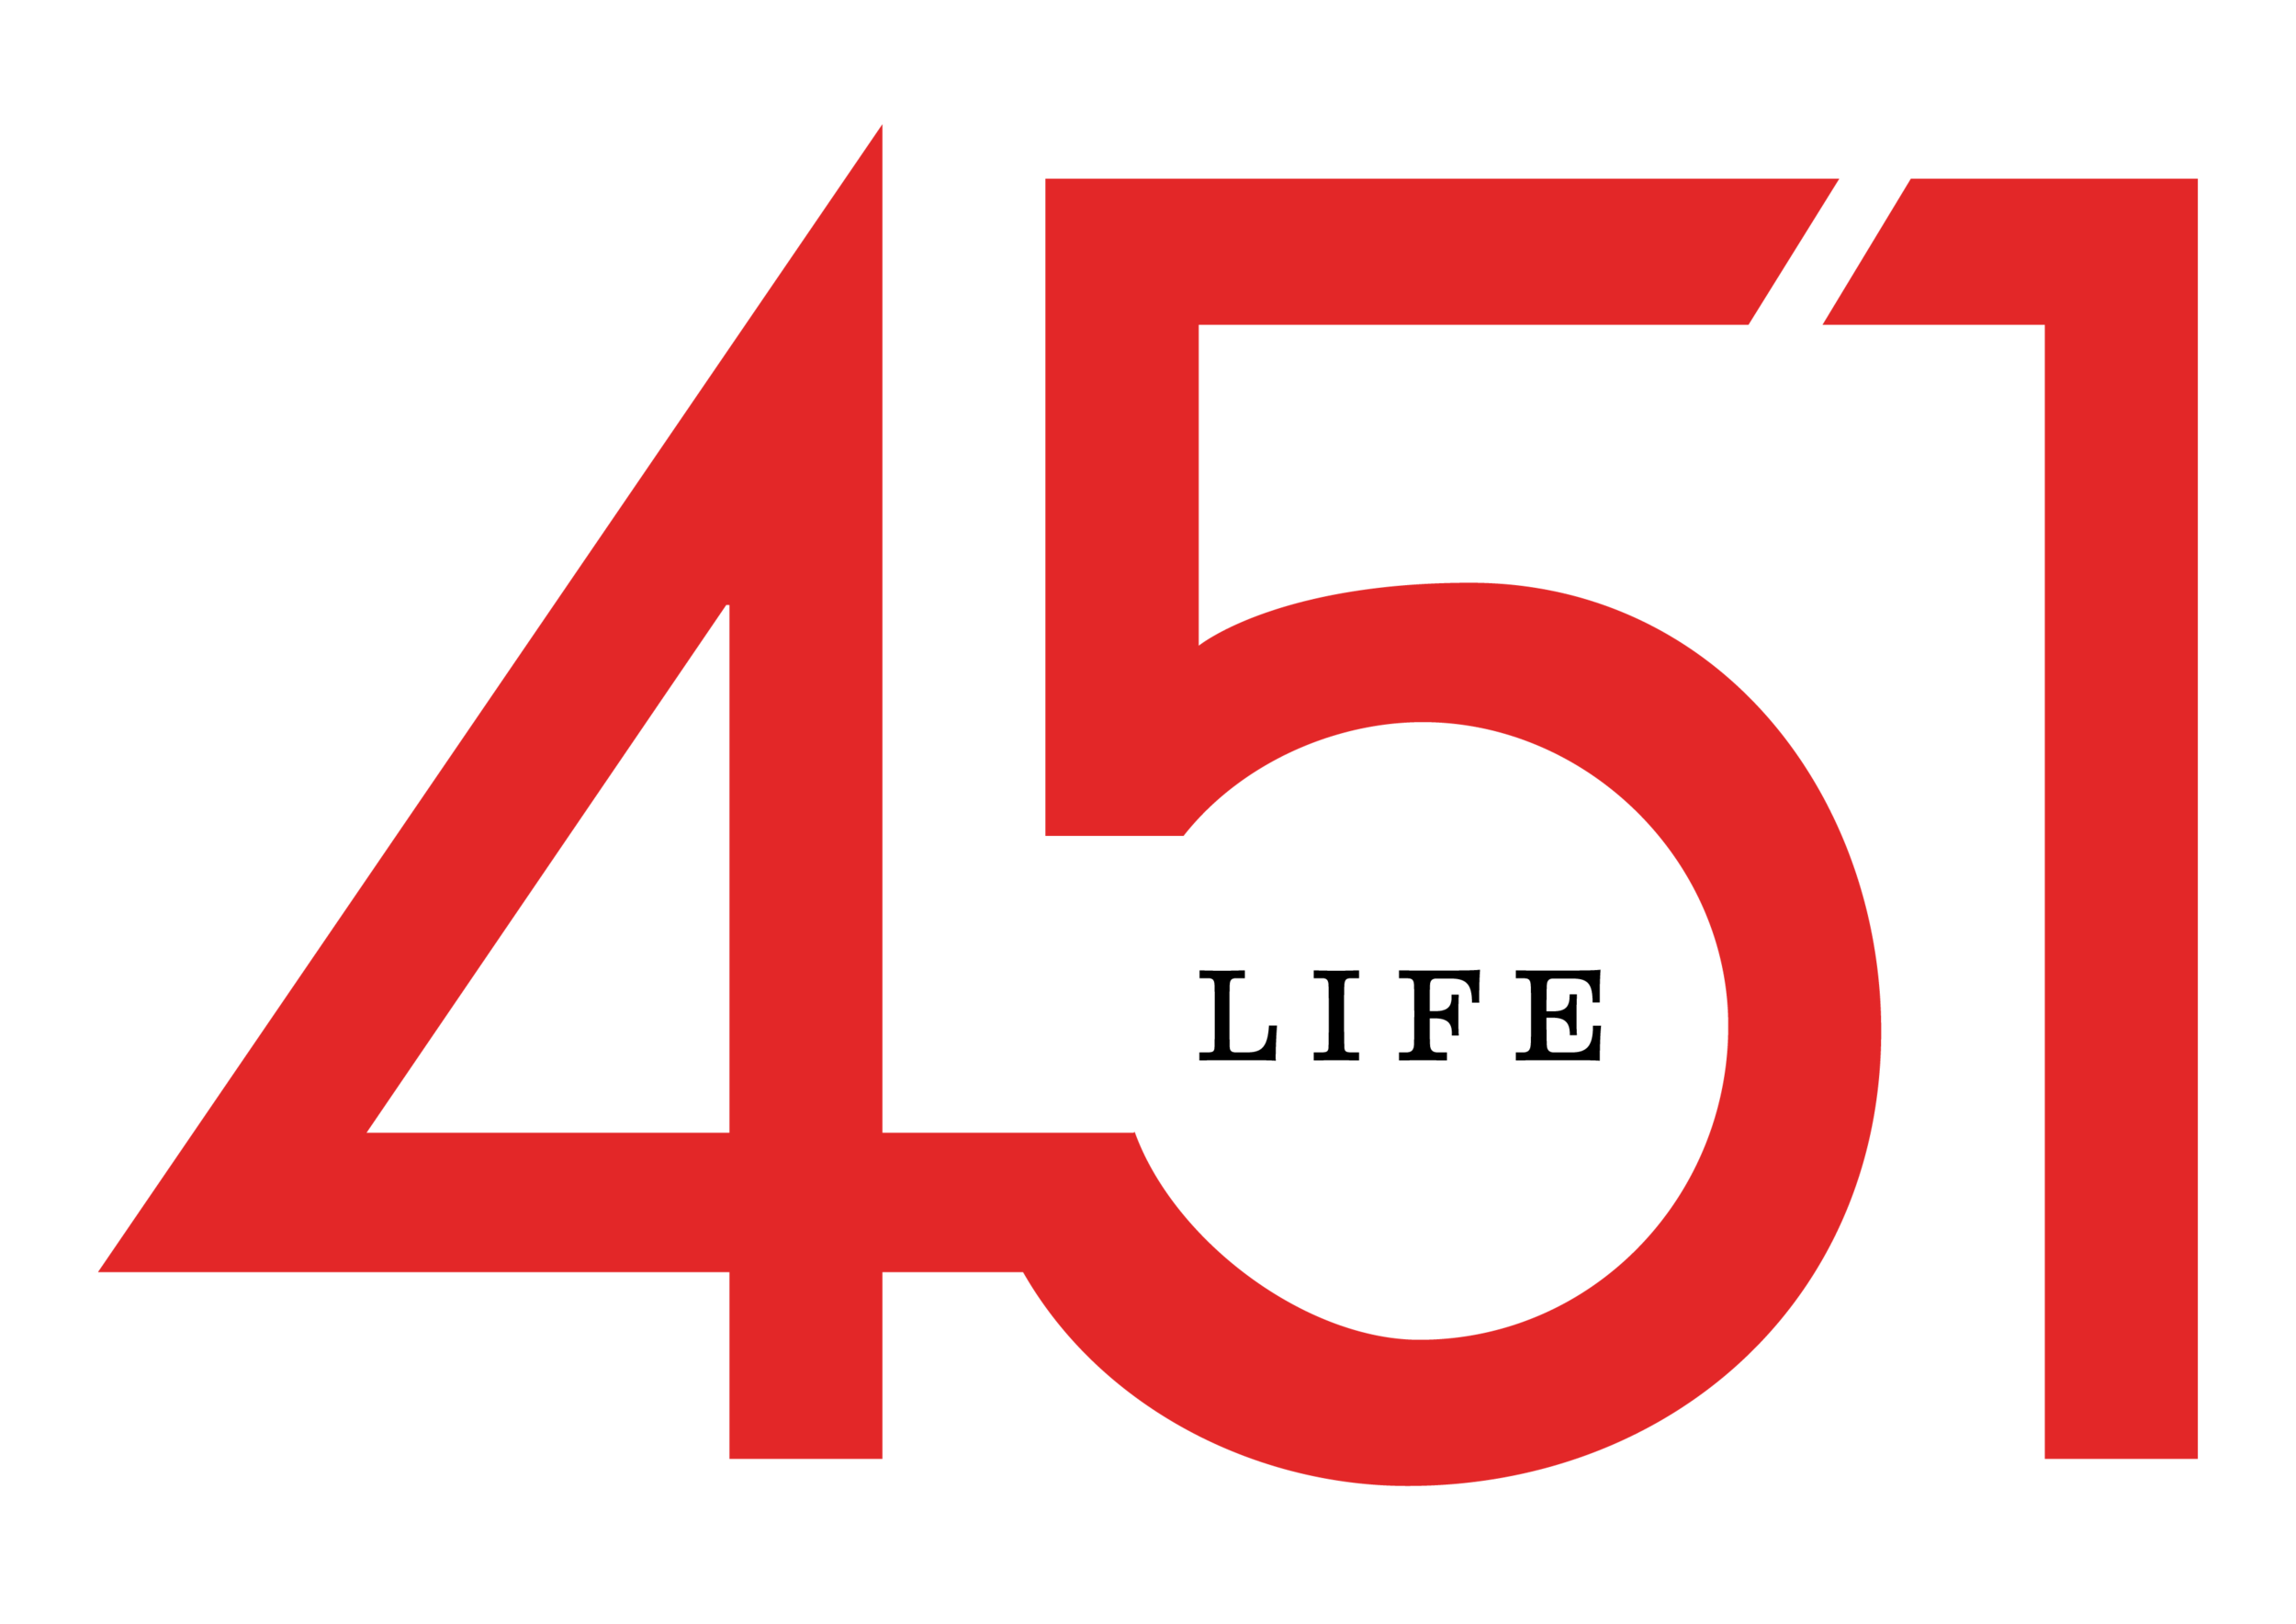 451 life_logo_red.png